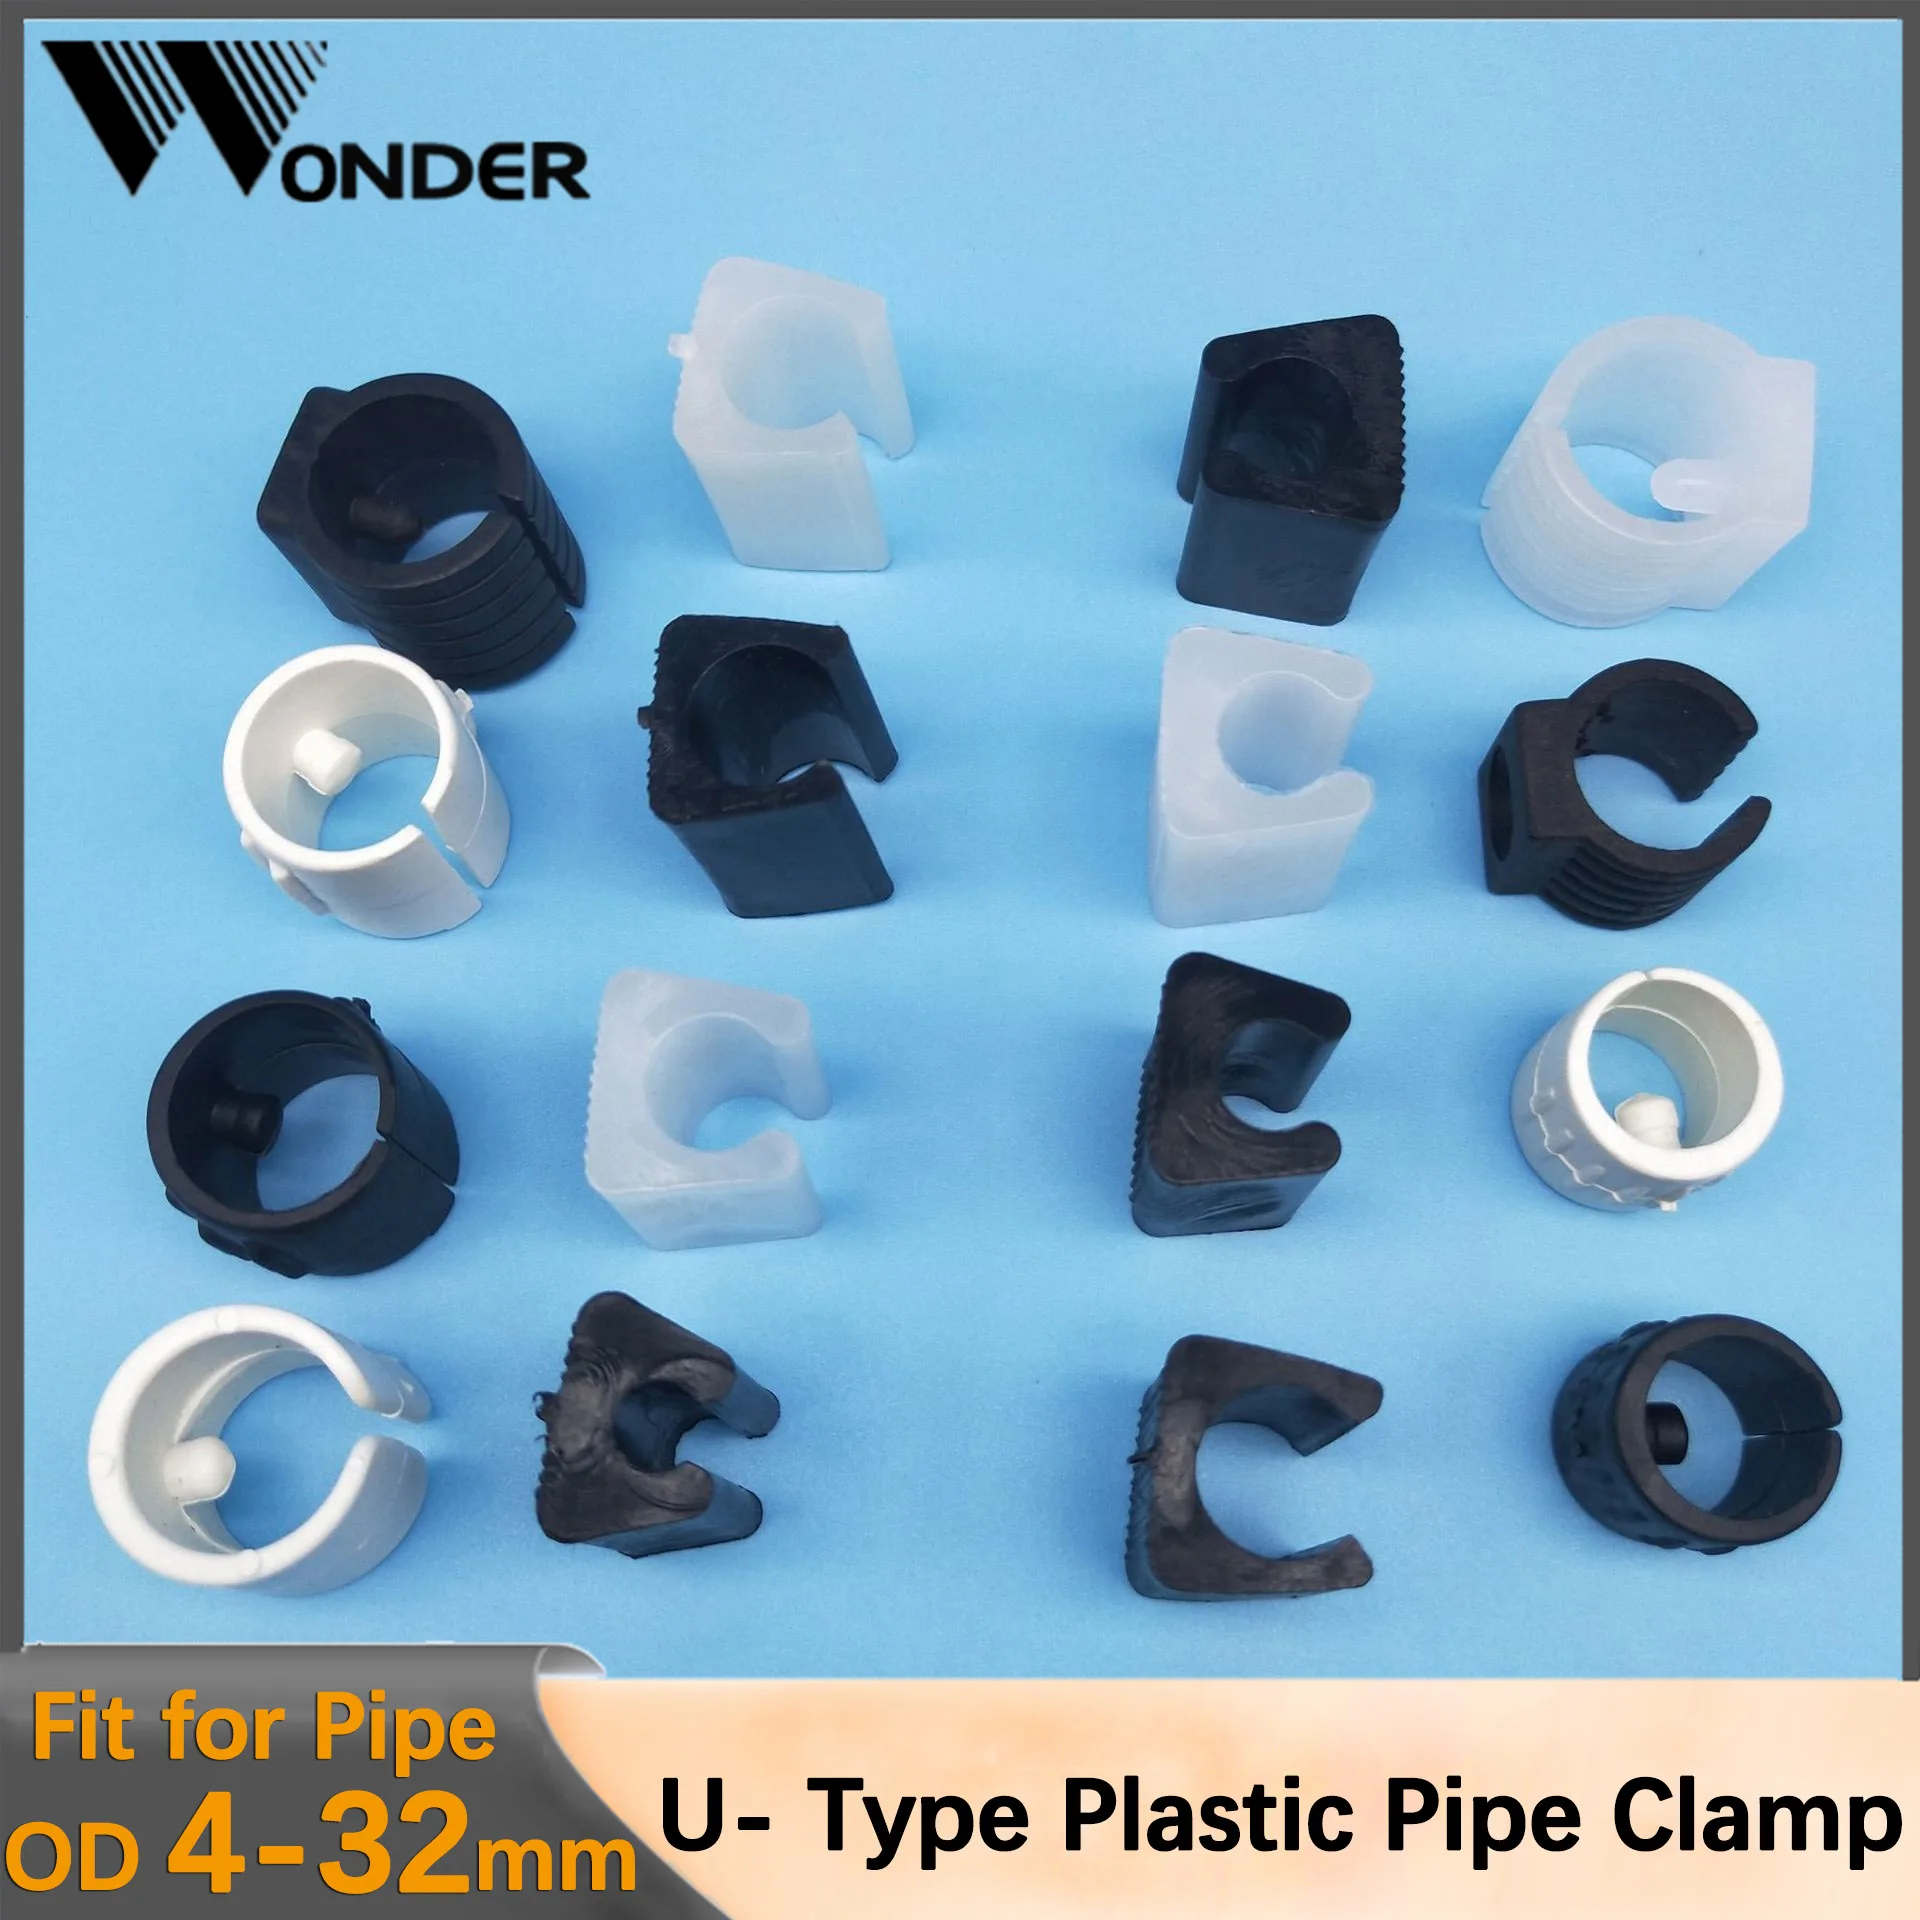 Chair Leg Tips Caps U- Type Rubber Furniture Foot U Shaped Pipe Clamp Non-slip Table Chair Leg End Covers Floor Protectors Cover